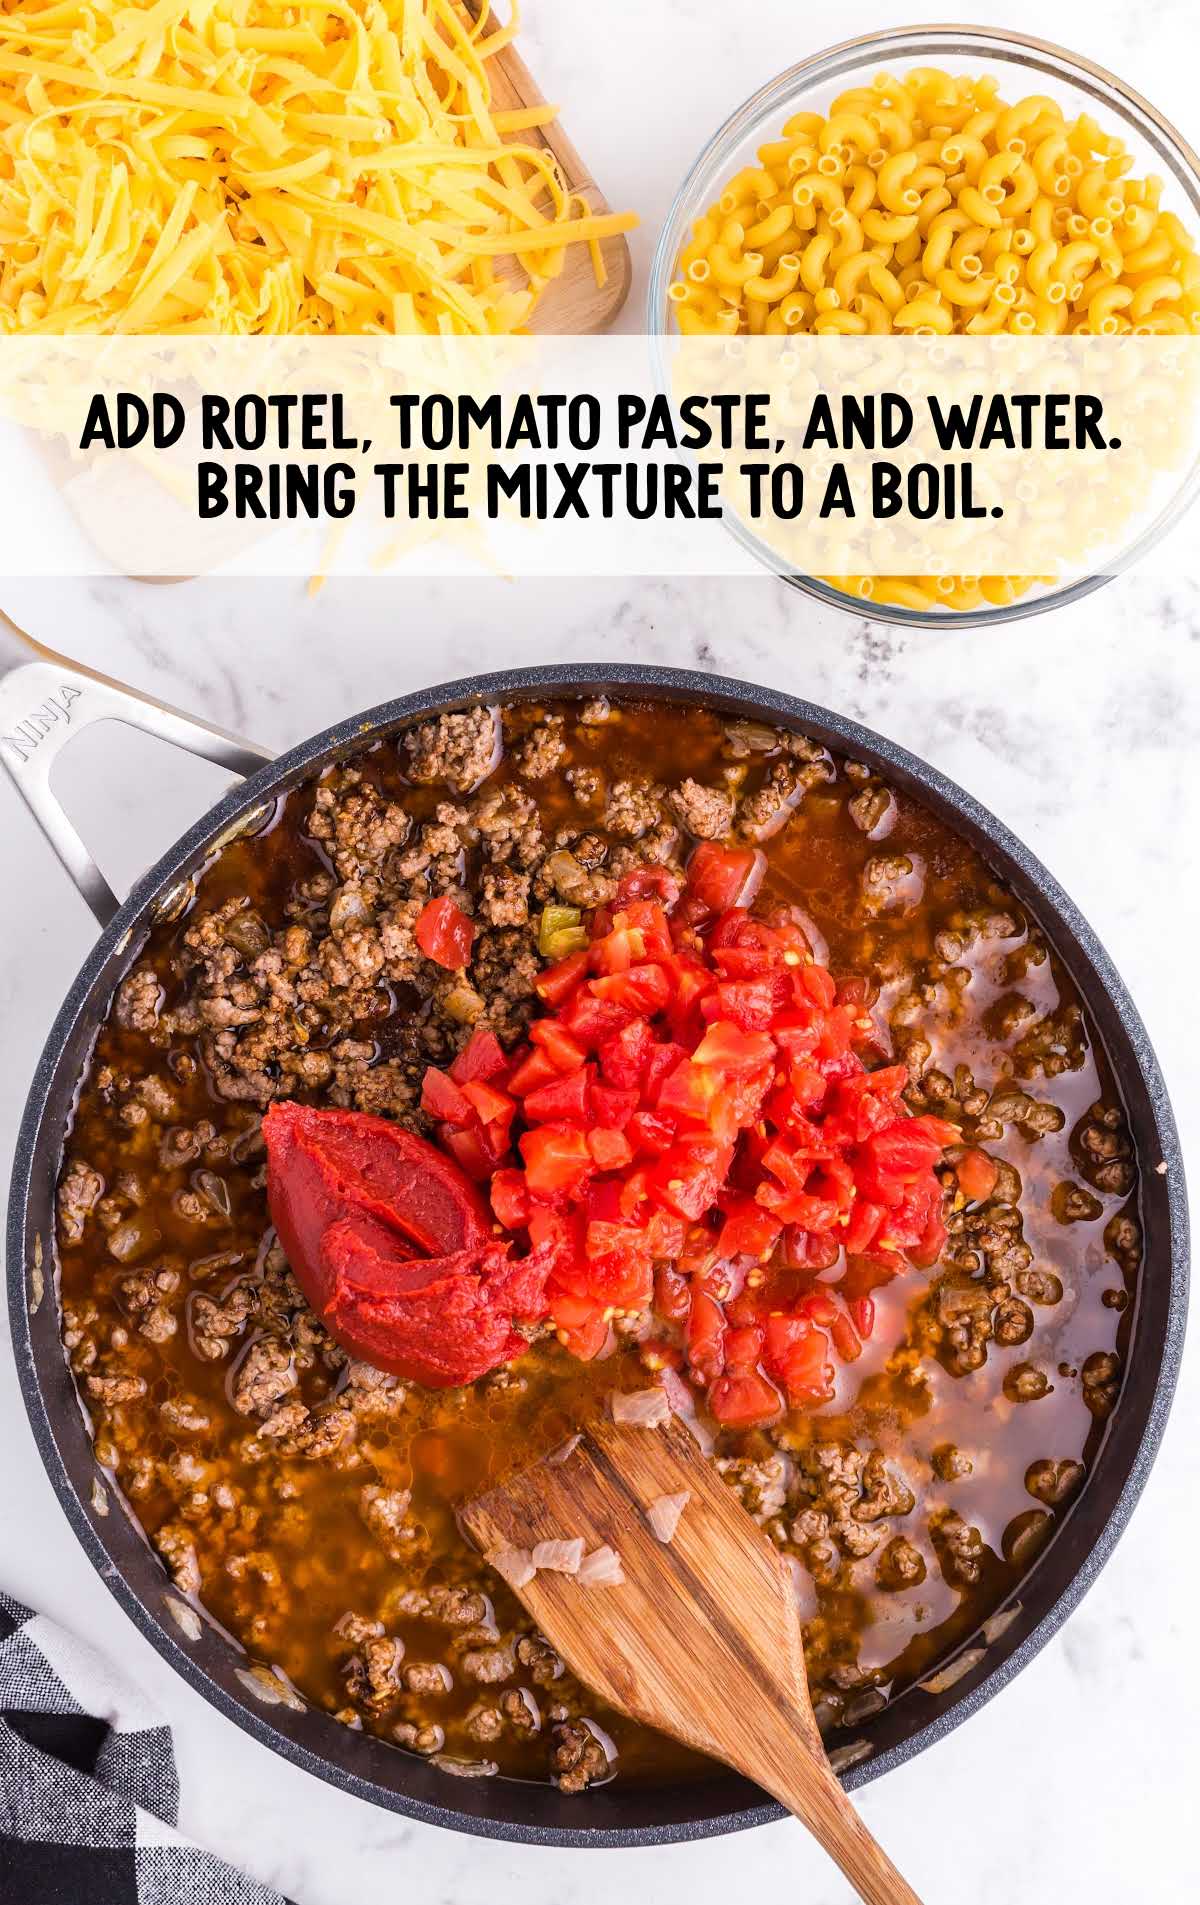 rotel, tomato paste, and water added to the pot of ground beef